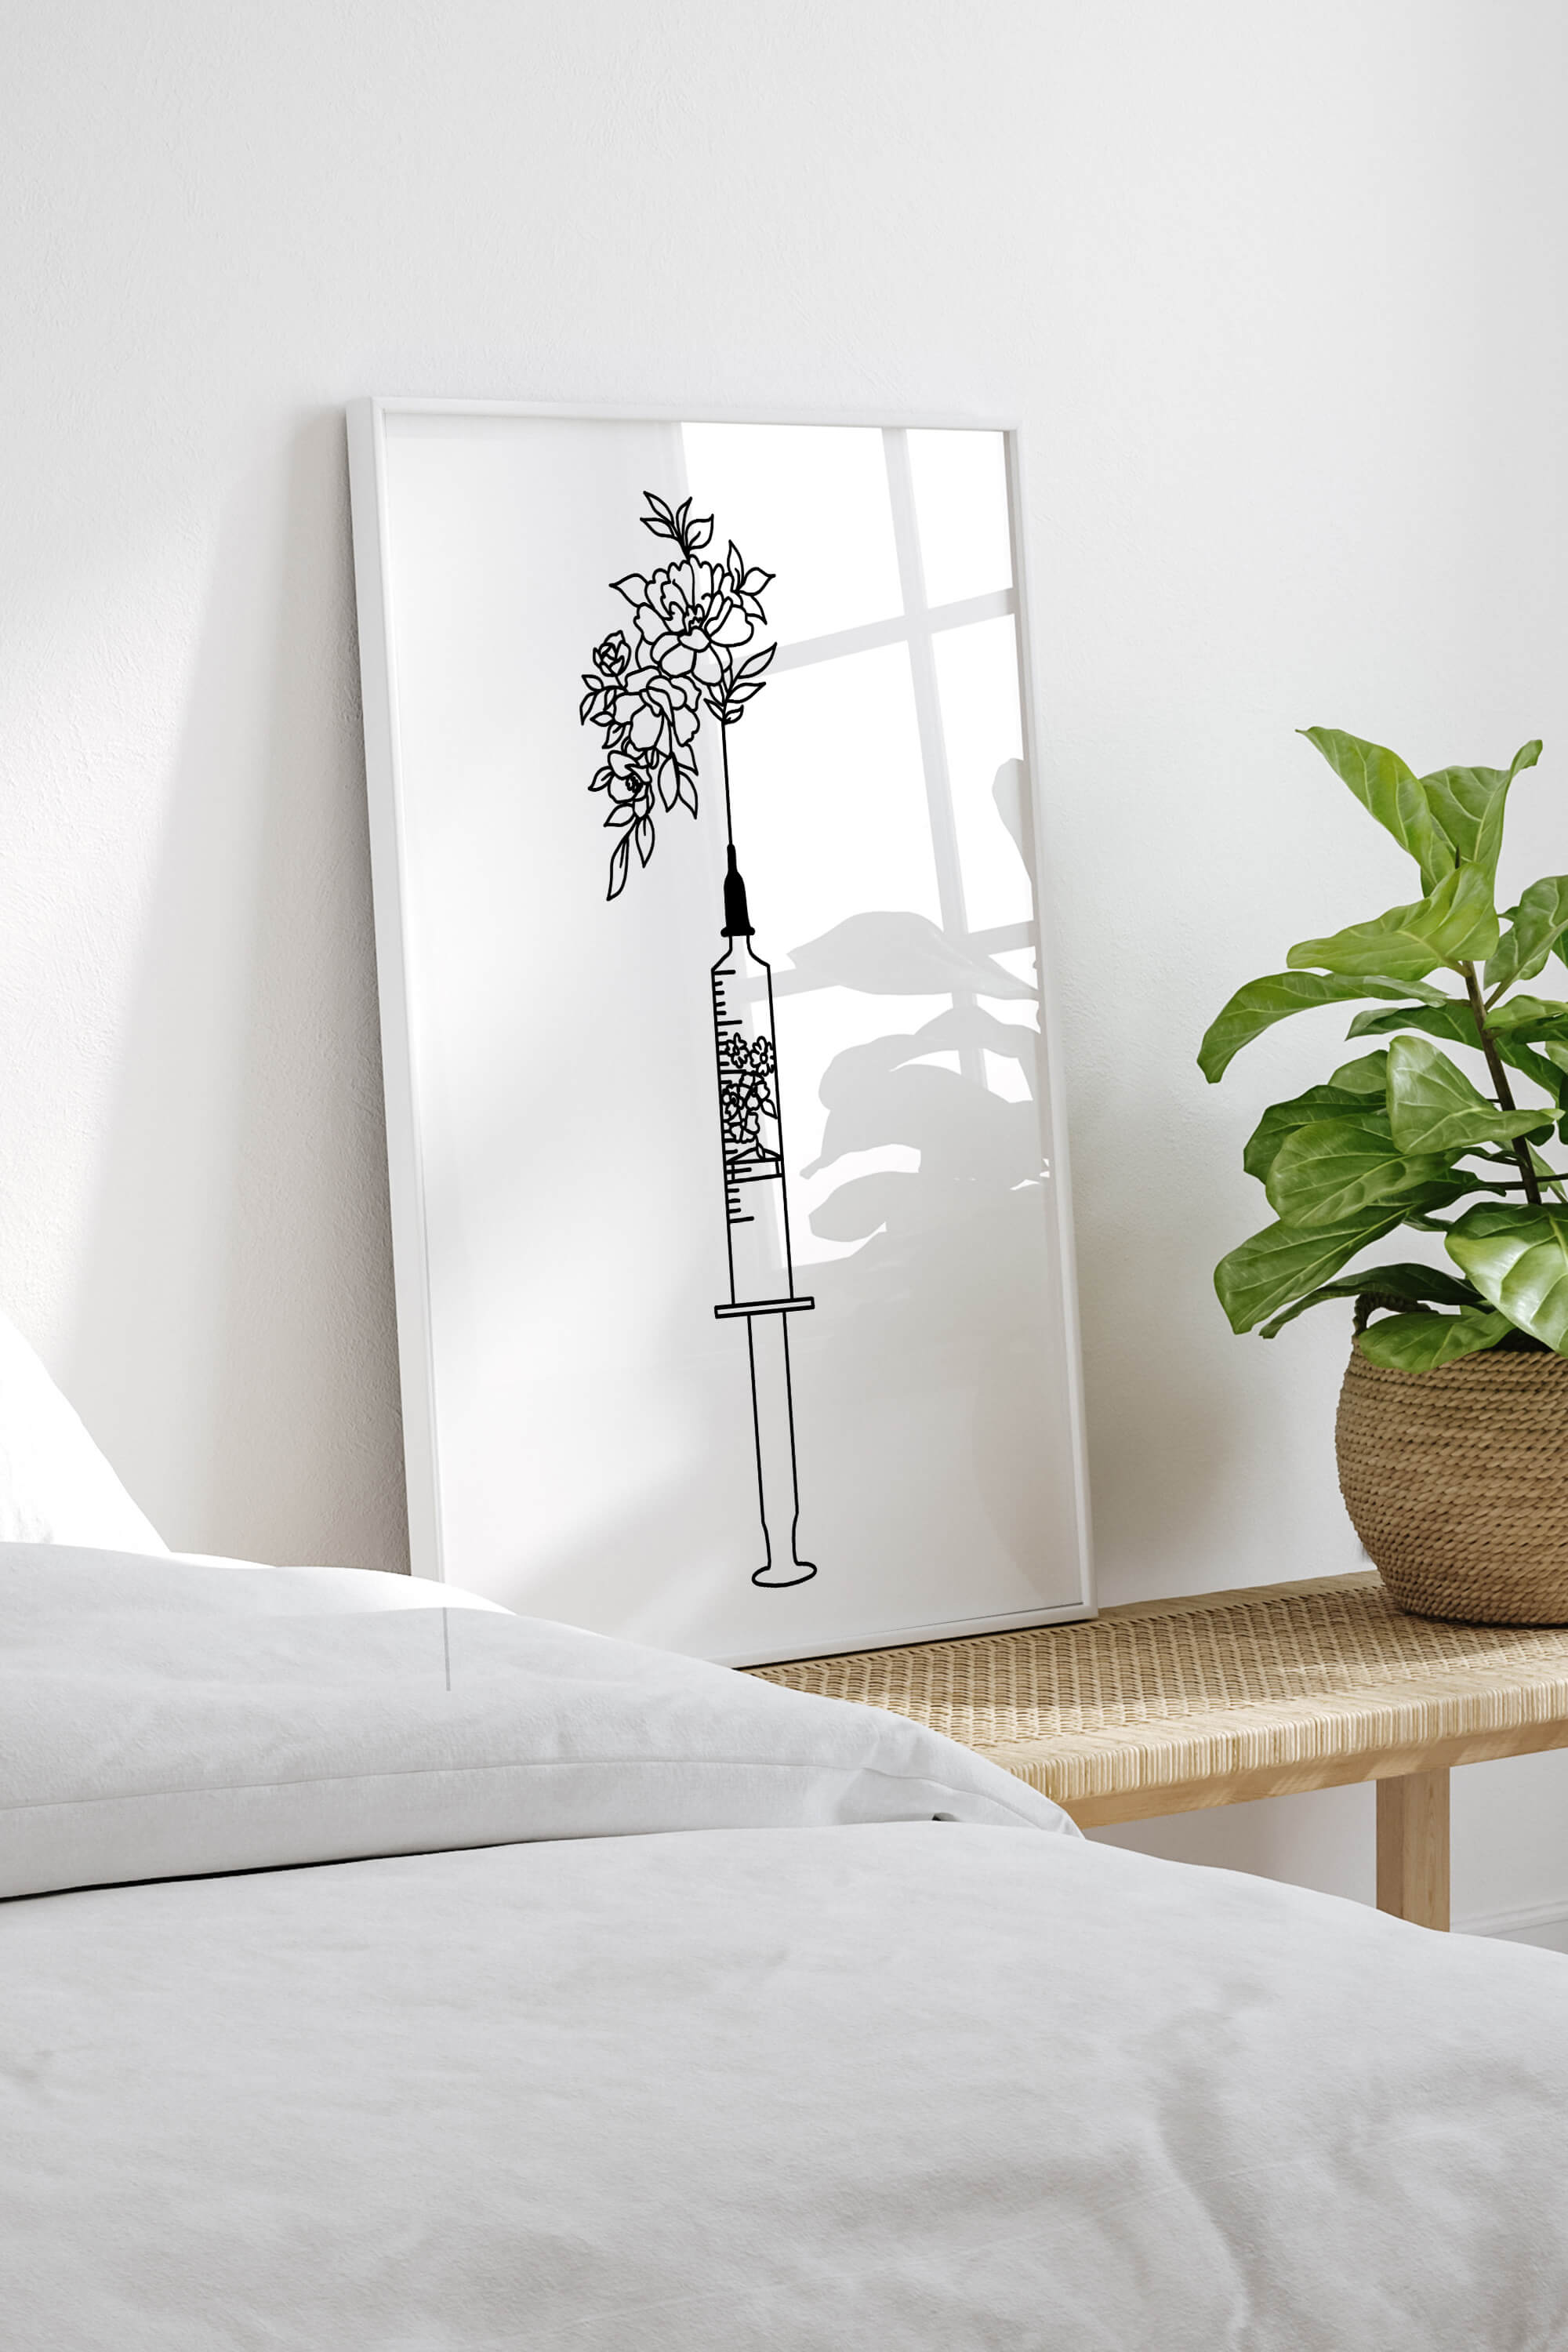 Elevate your space with monochrome sophistication in this floral syringe wall art. Precision meets elegance in black and white, making it a timeless addition to any decor. Perfect for those with discerning tastes.